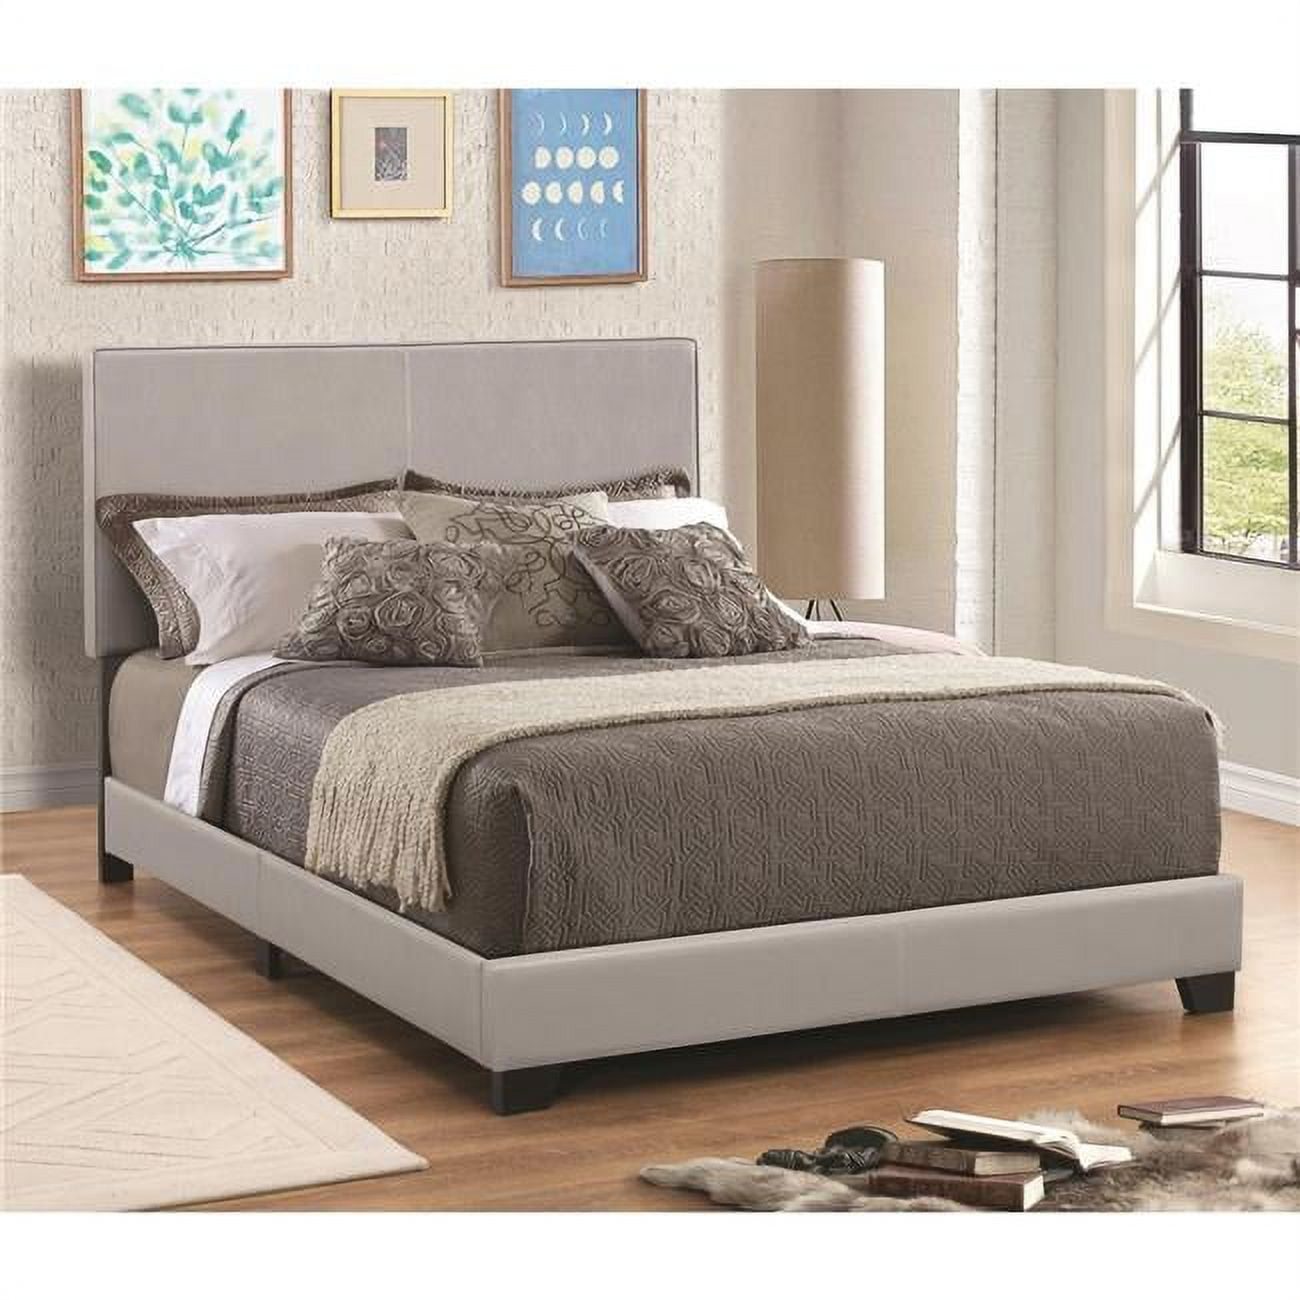 Picture of Benzara BM182796 Leather Upholstered Full Size Platform Bed, Gray - 45.75 x 58 x 81.25 in.